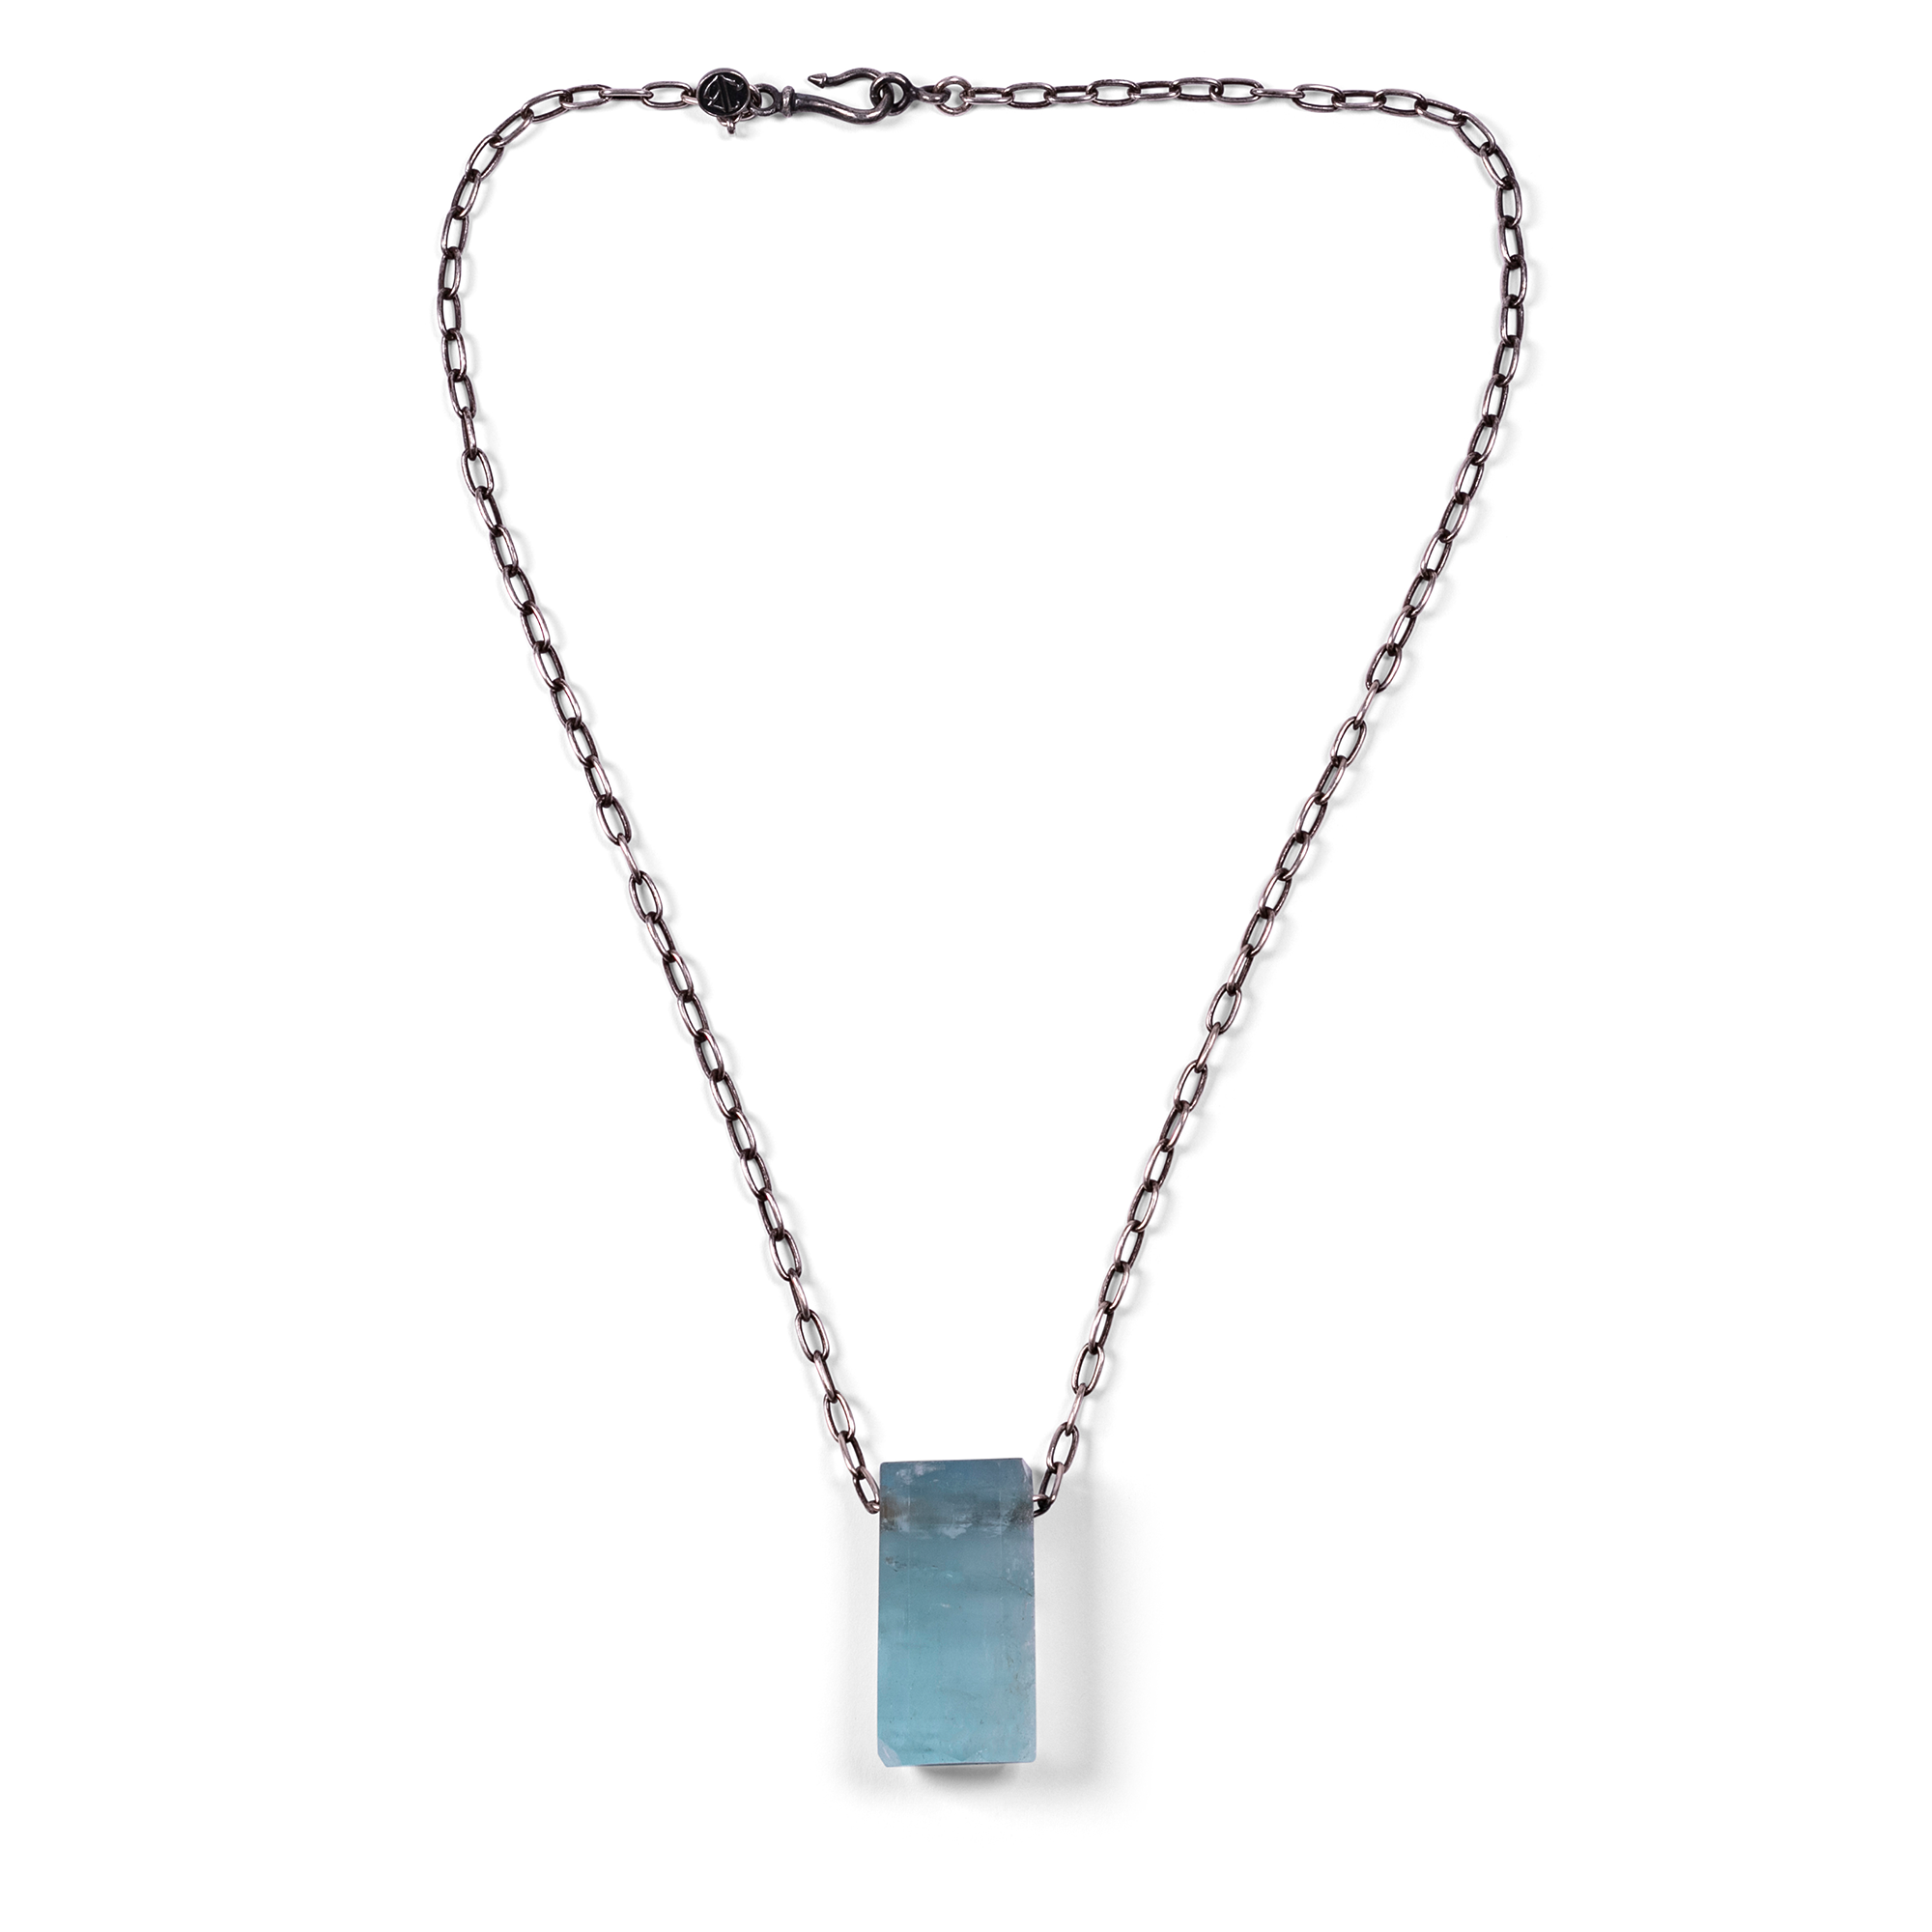 Aquamarine Necklace On Silver Chain - Large